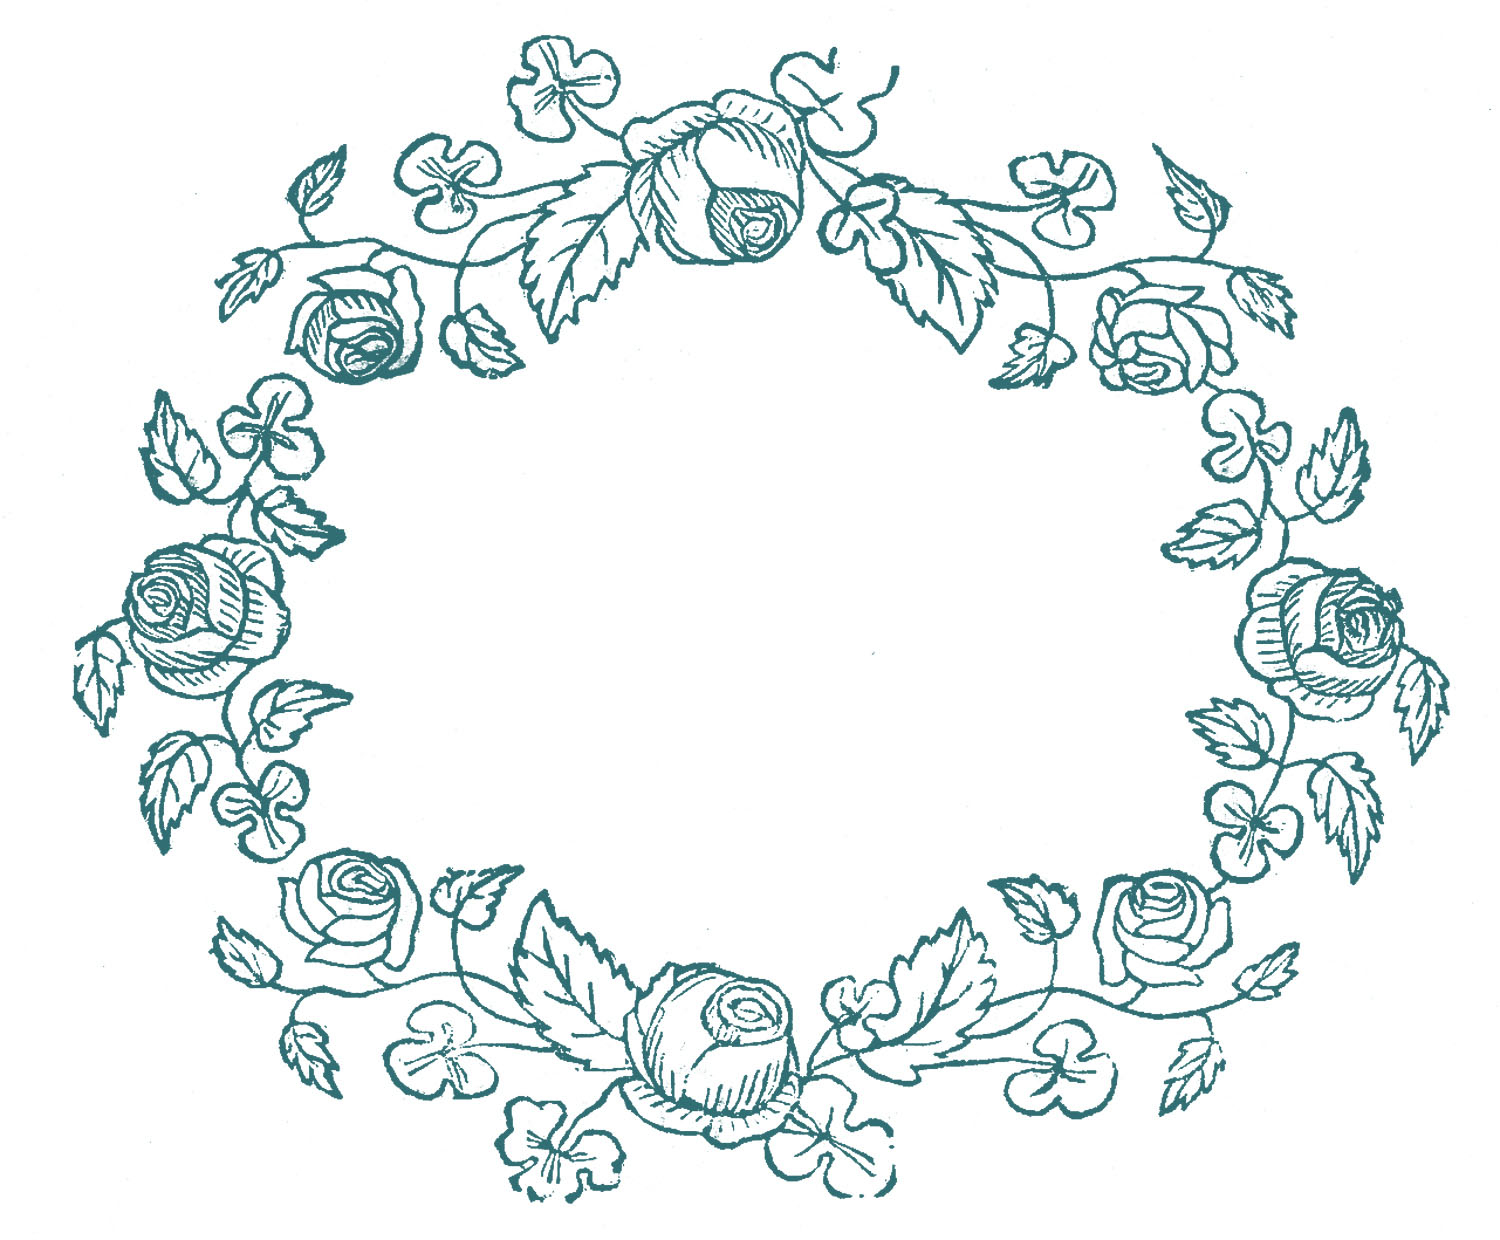 Free Vintage Embroidery Patterns Royalty Free Images Rose Wreaths Embroidery Pattern The